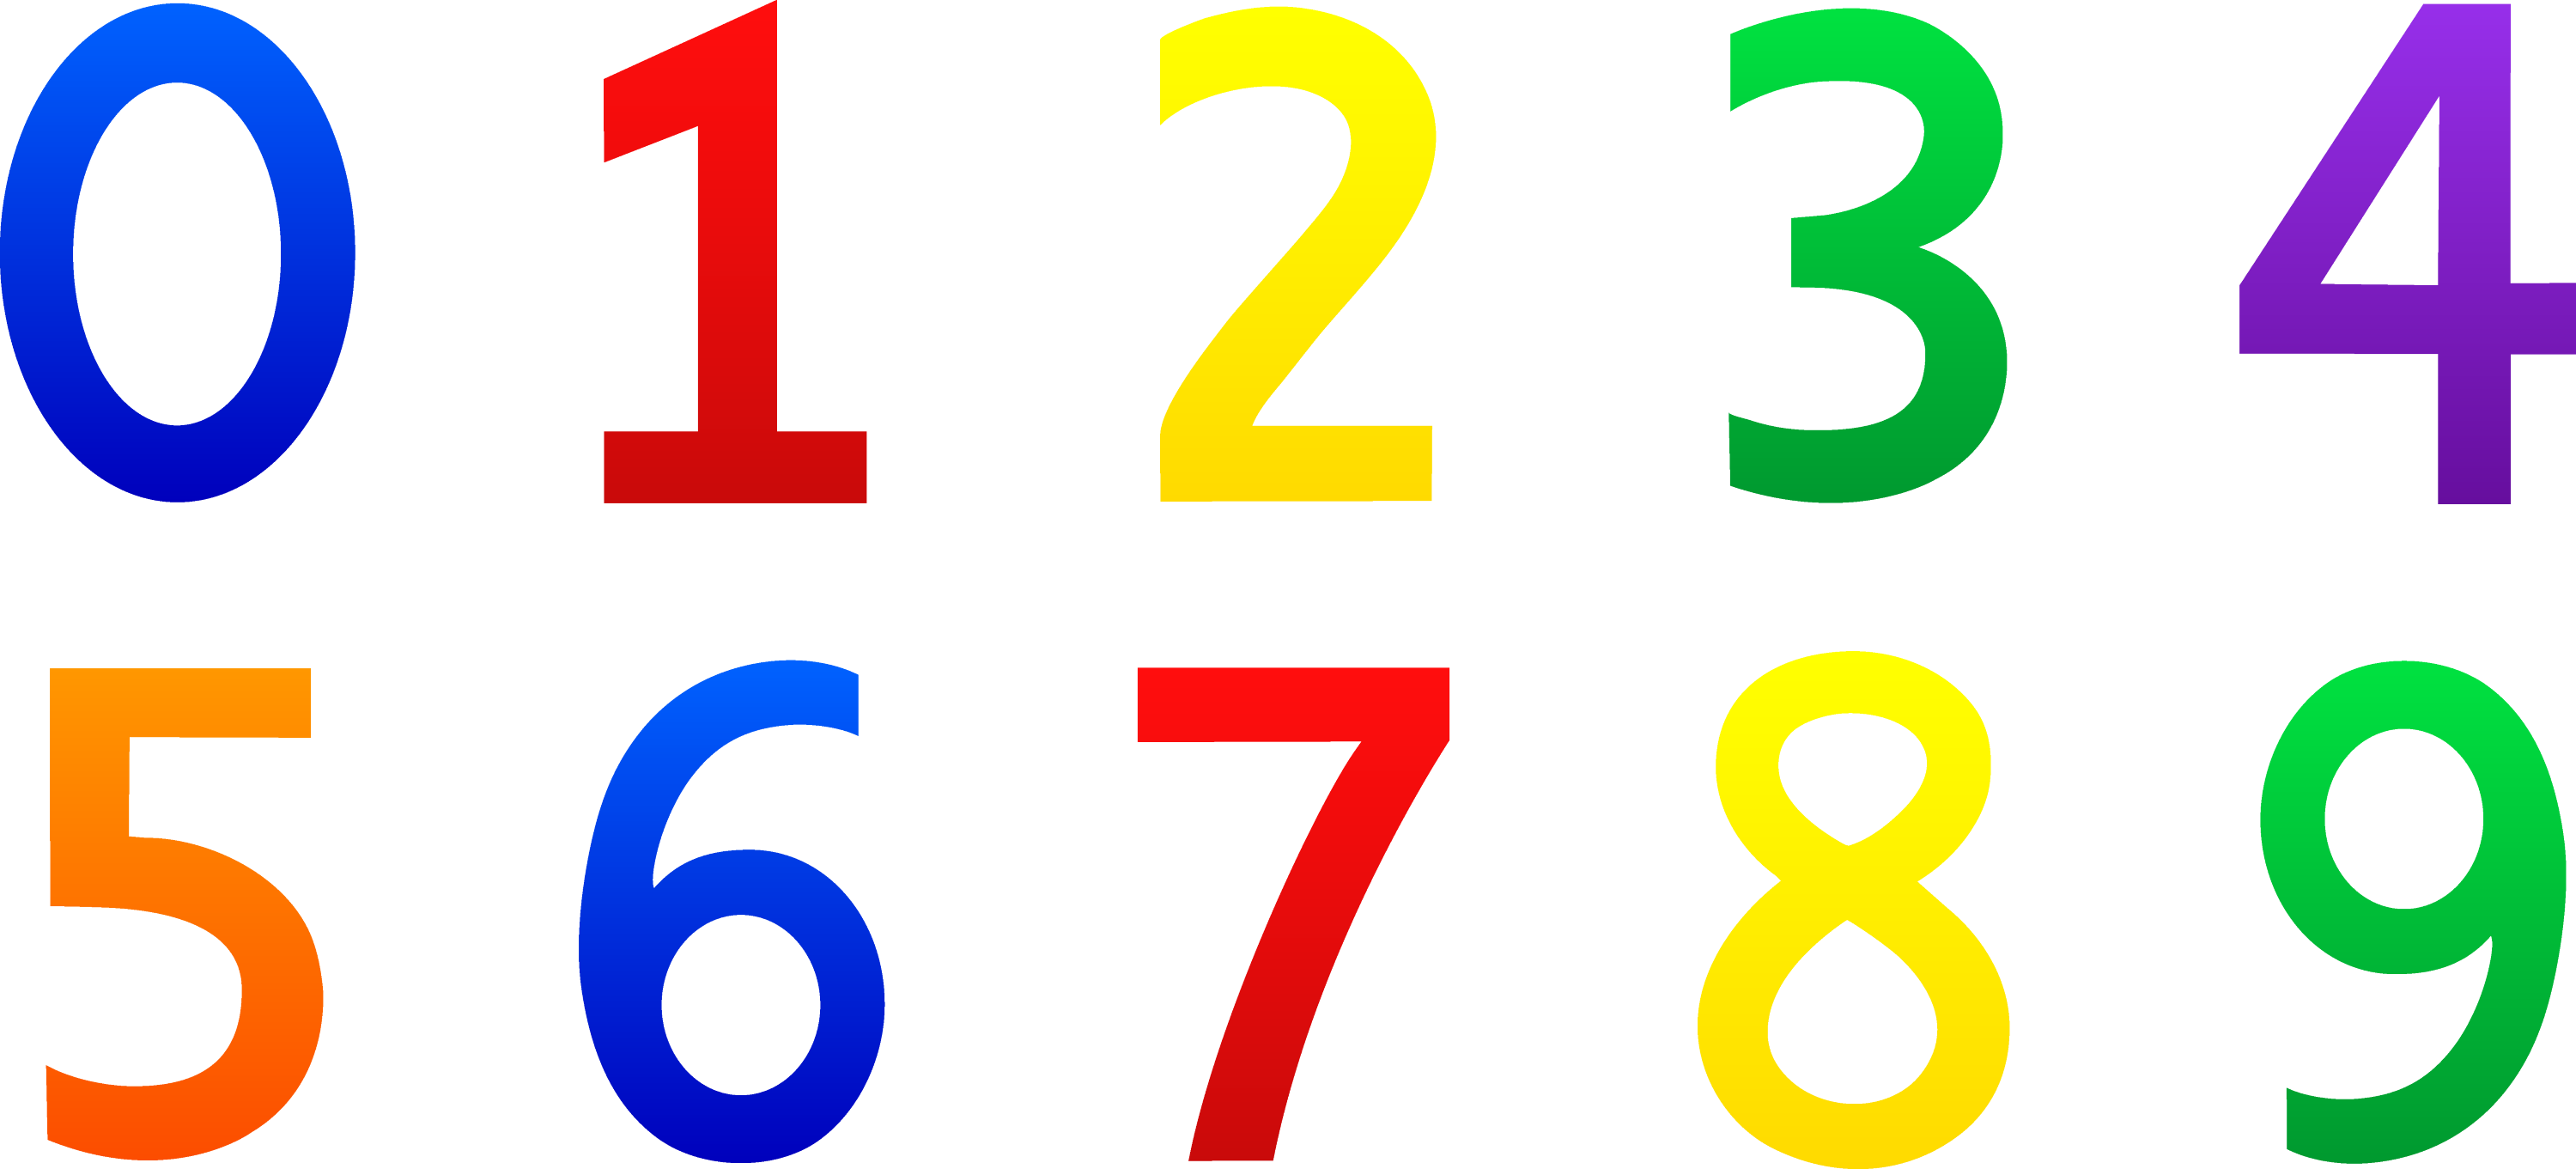 numbers 0-9 listed in colors